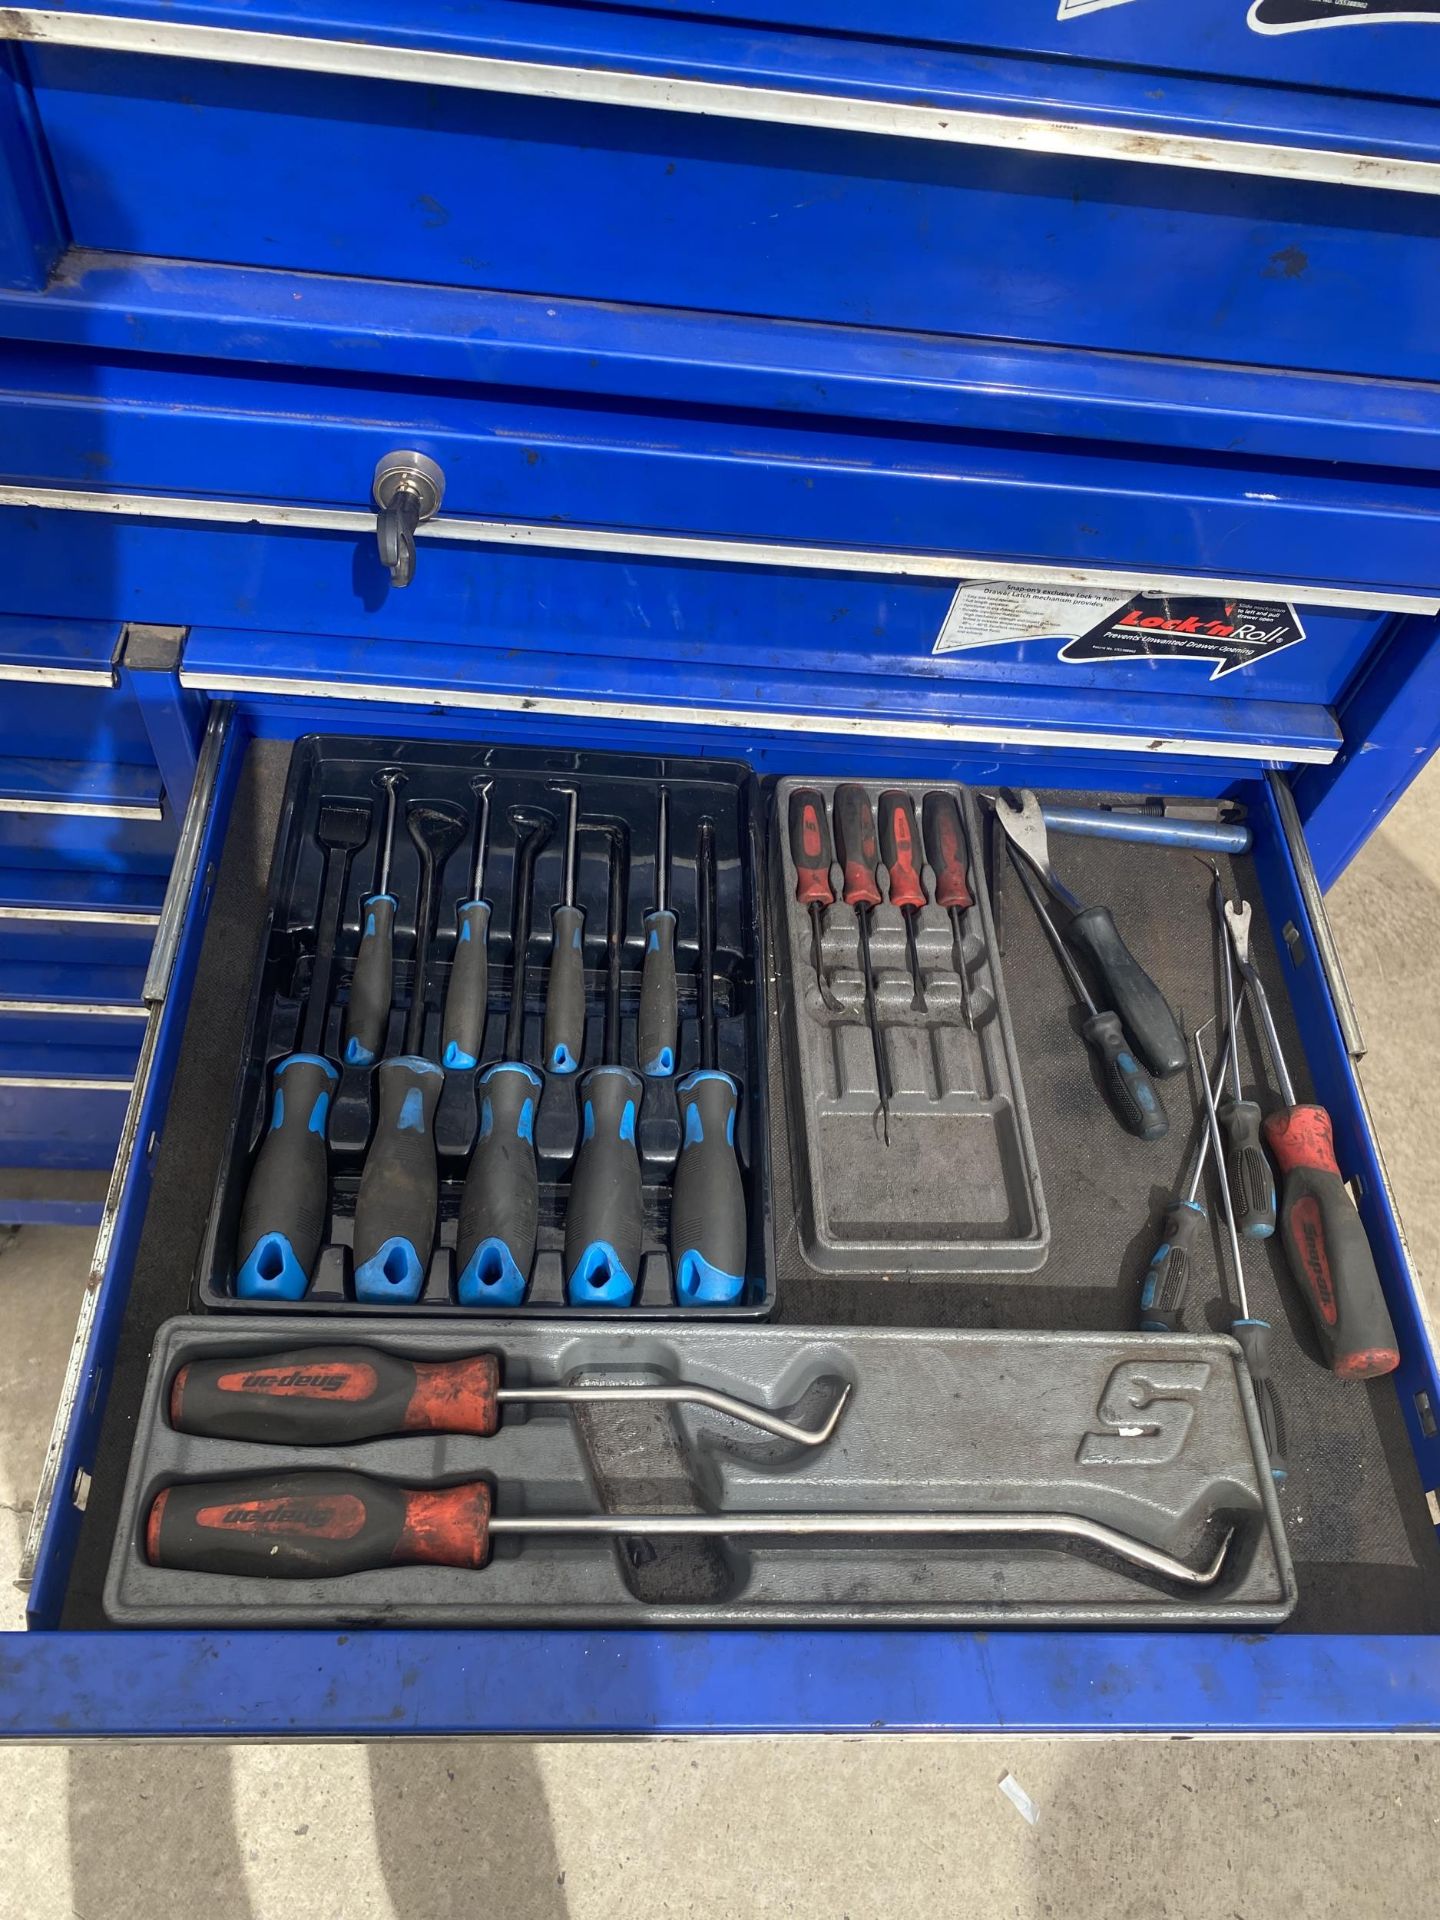 A LARGE TWENTY DRAWER FOUR WHEELED METAL SNAPON MECHANICS CHEST, FULL OF SNAP ON TOOLS TO INCLUDE - Image 16 of 27